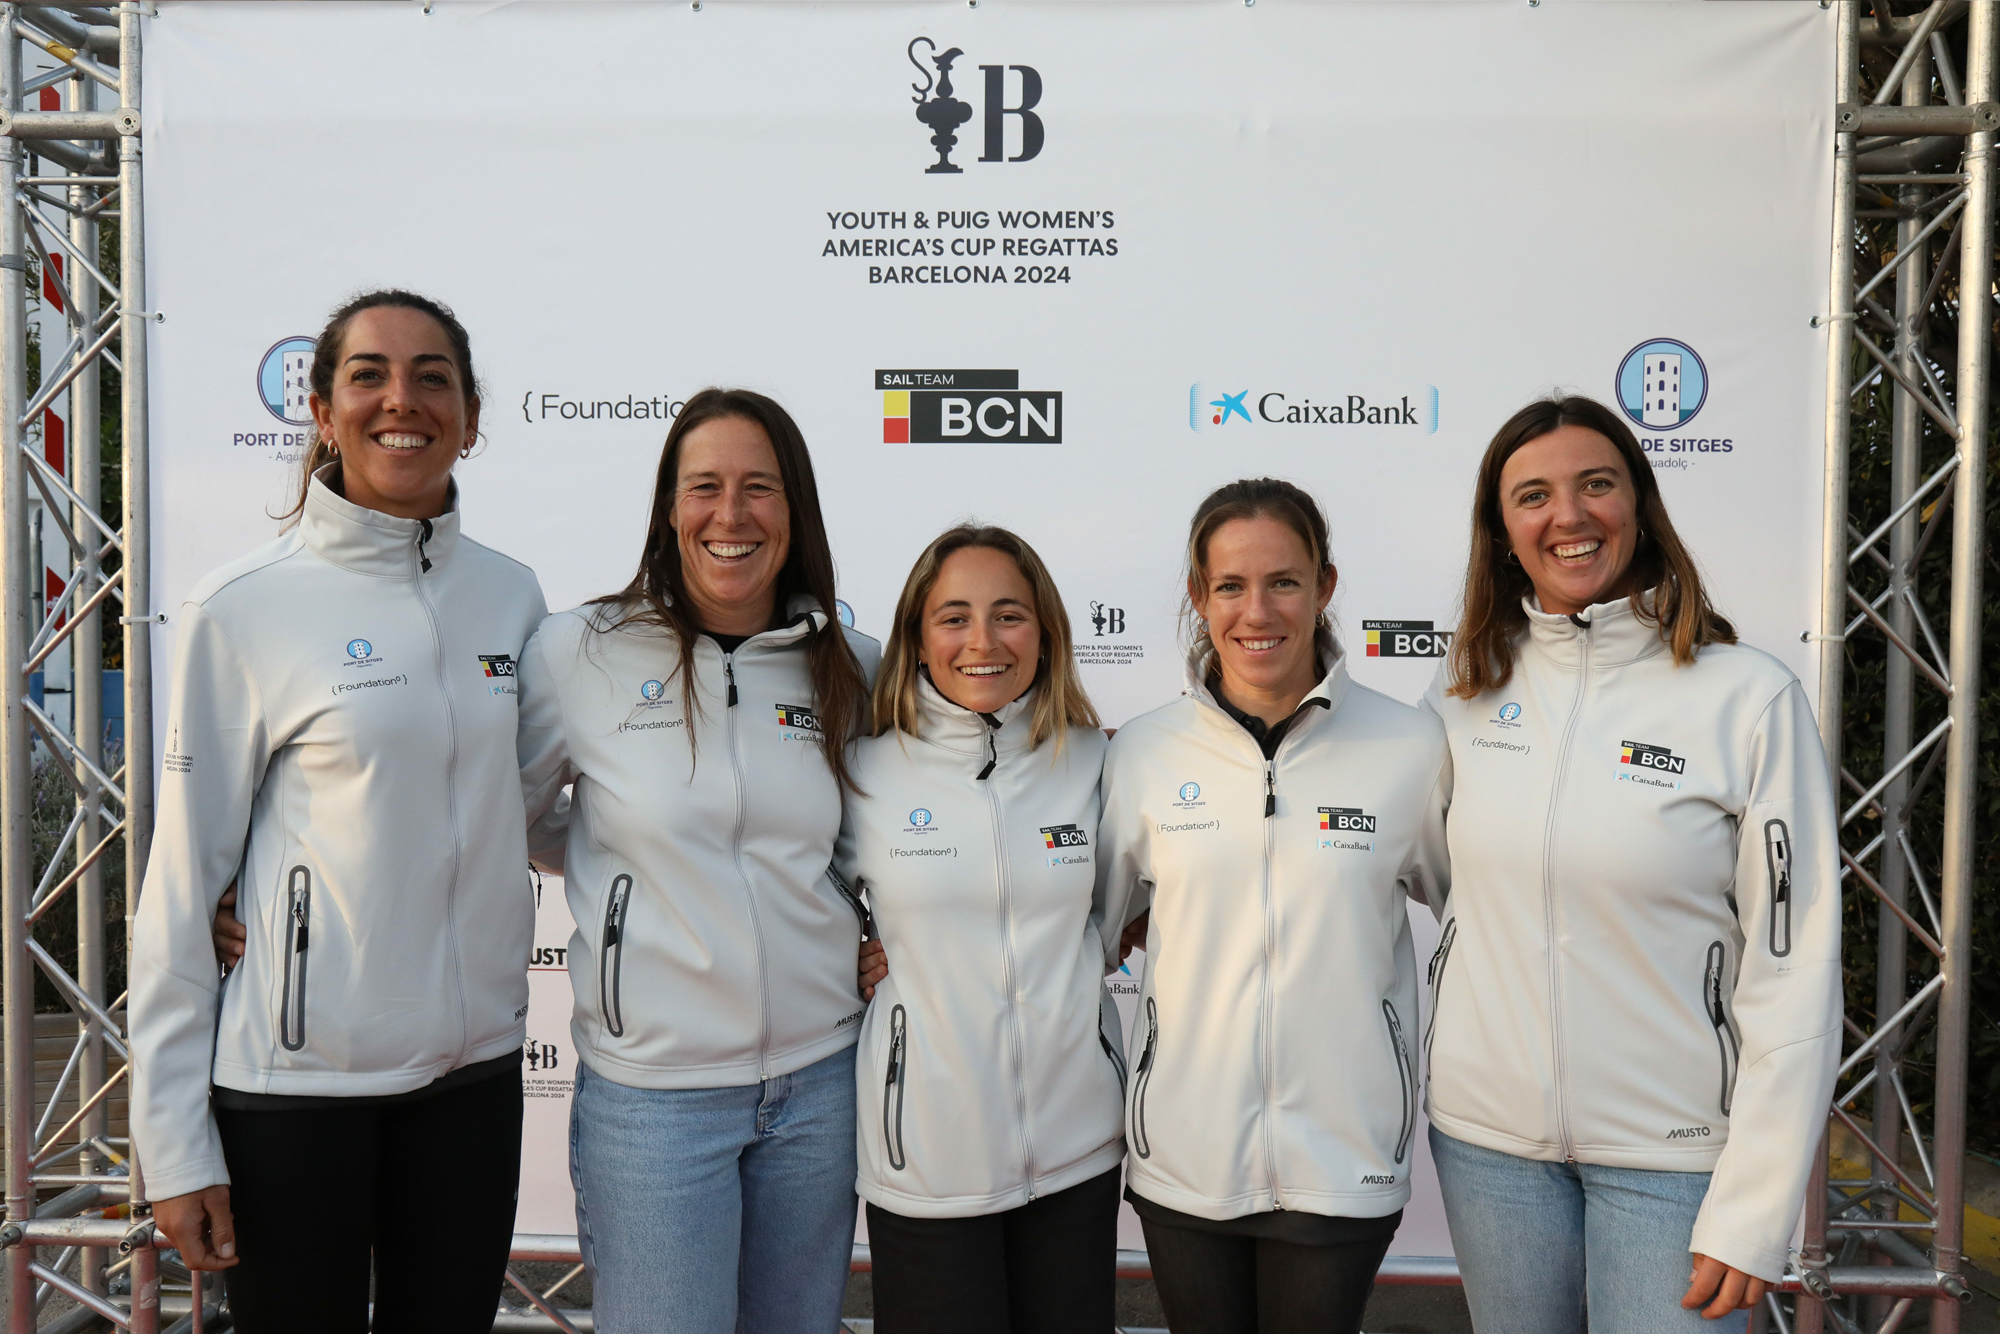 SAIL TEAM BCN PRESENTS ITS CREW FOR THE FIRST WOMEN’S AMERICA’S CUP IN HISTORY